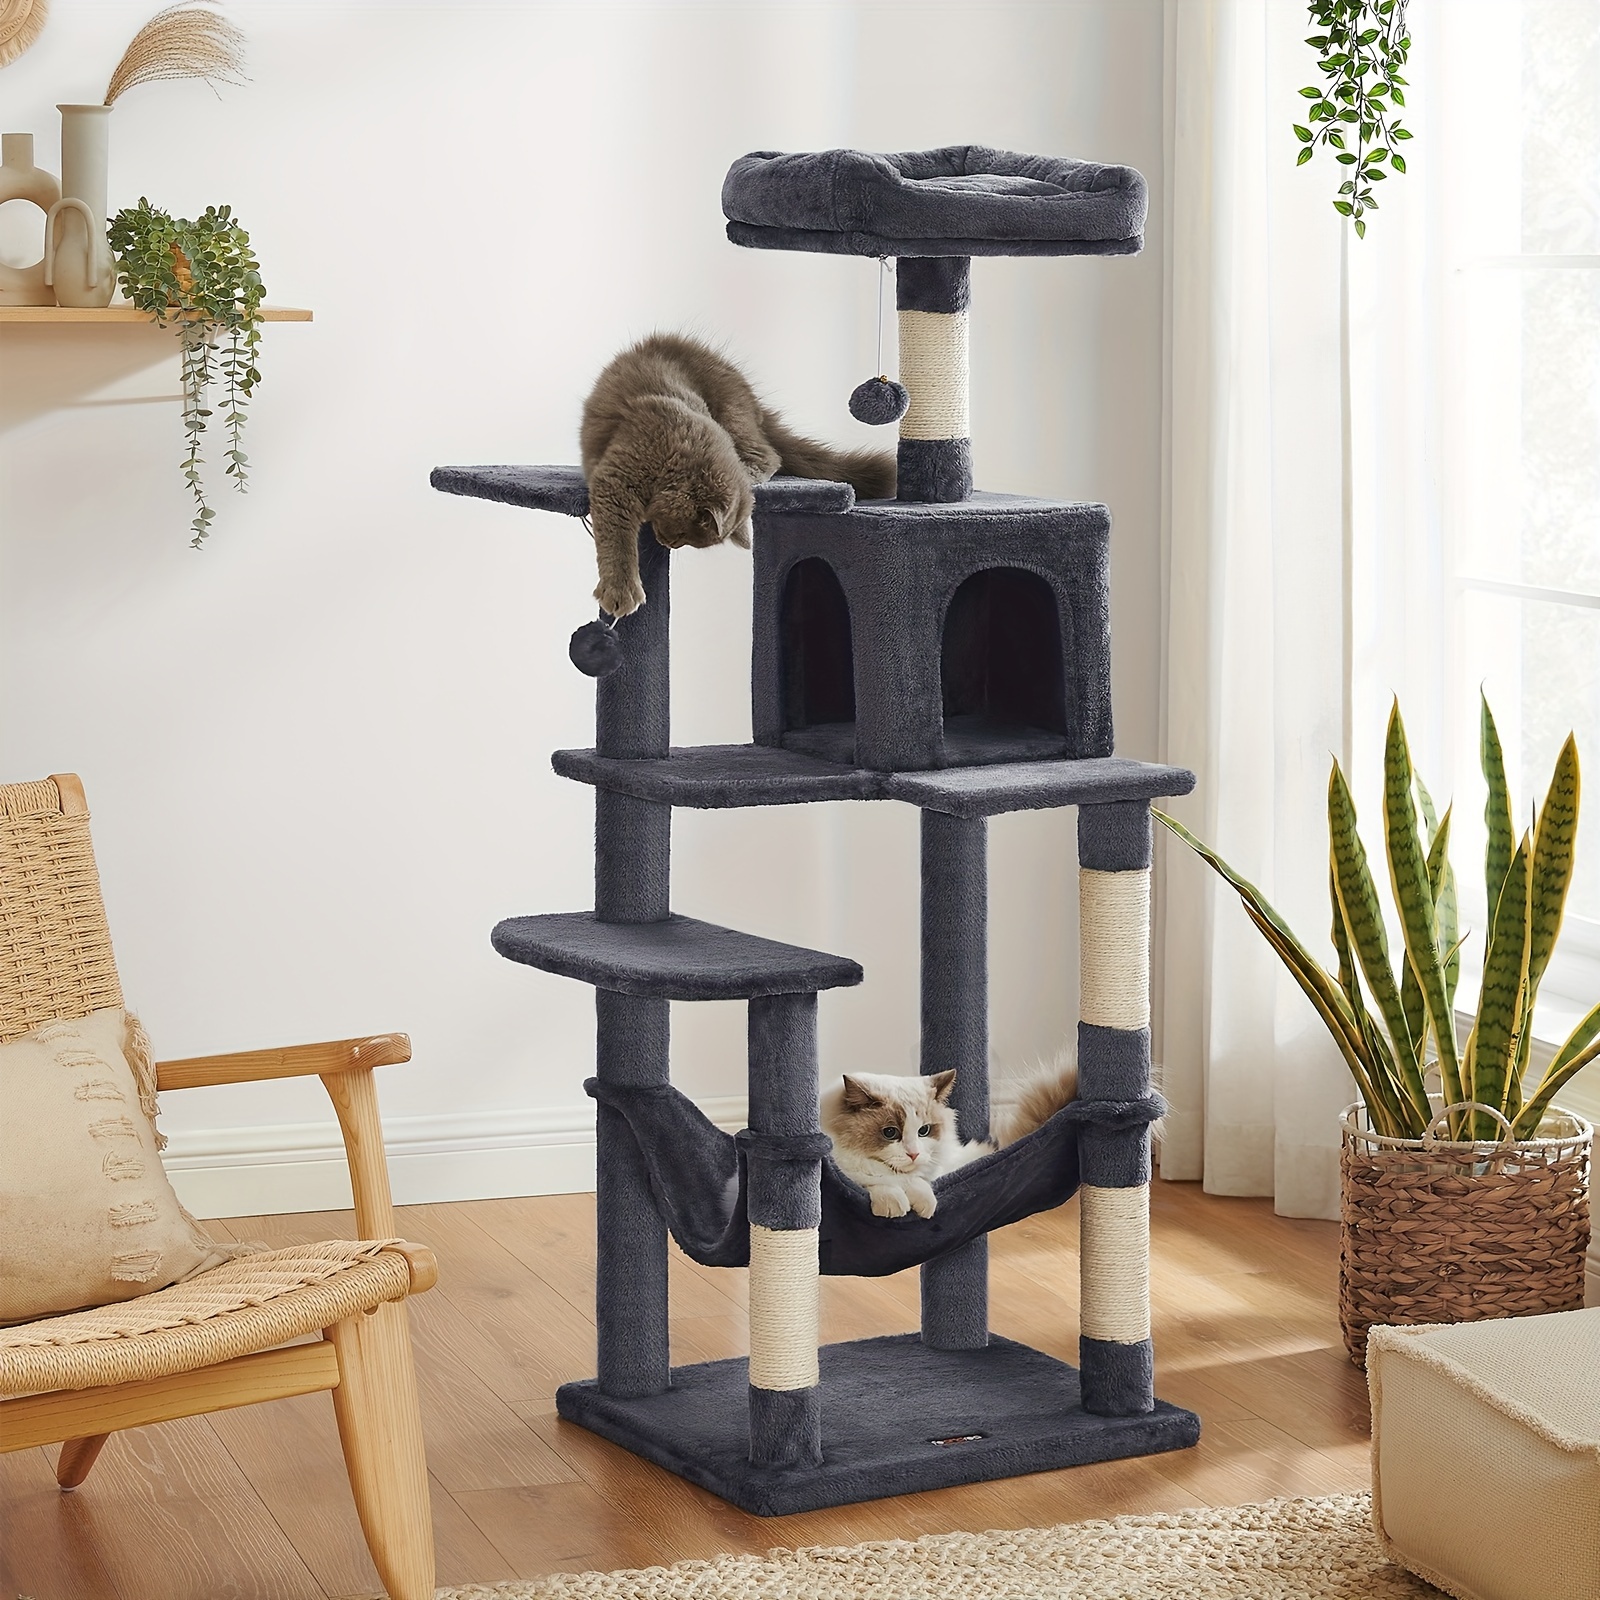 

Feandrea Cat Tree, 56.3-inch Cat Tower For Indoor Cats, Multi-level Cat Condo With 4 Scratching Posts, 2 Perches, Hammock, Cave